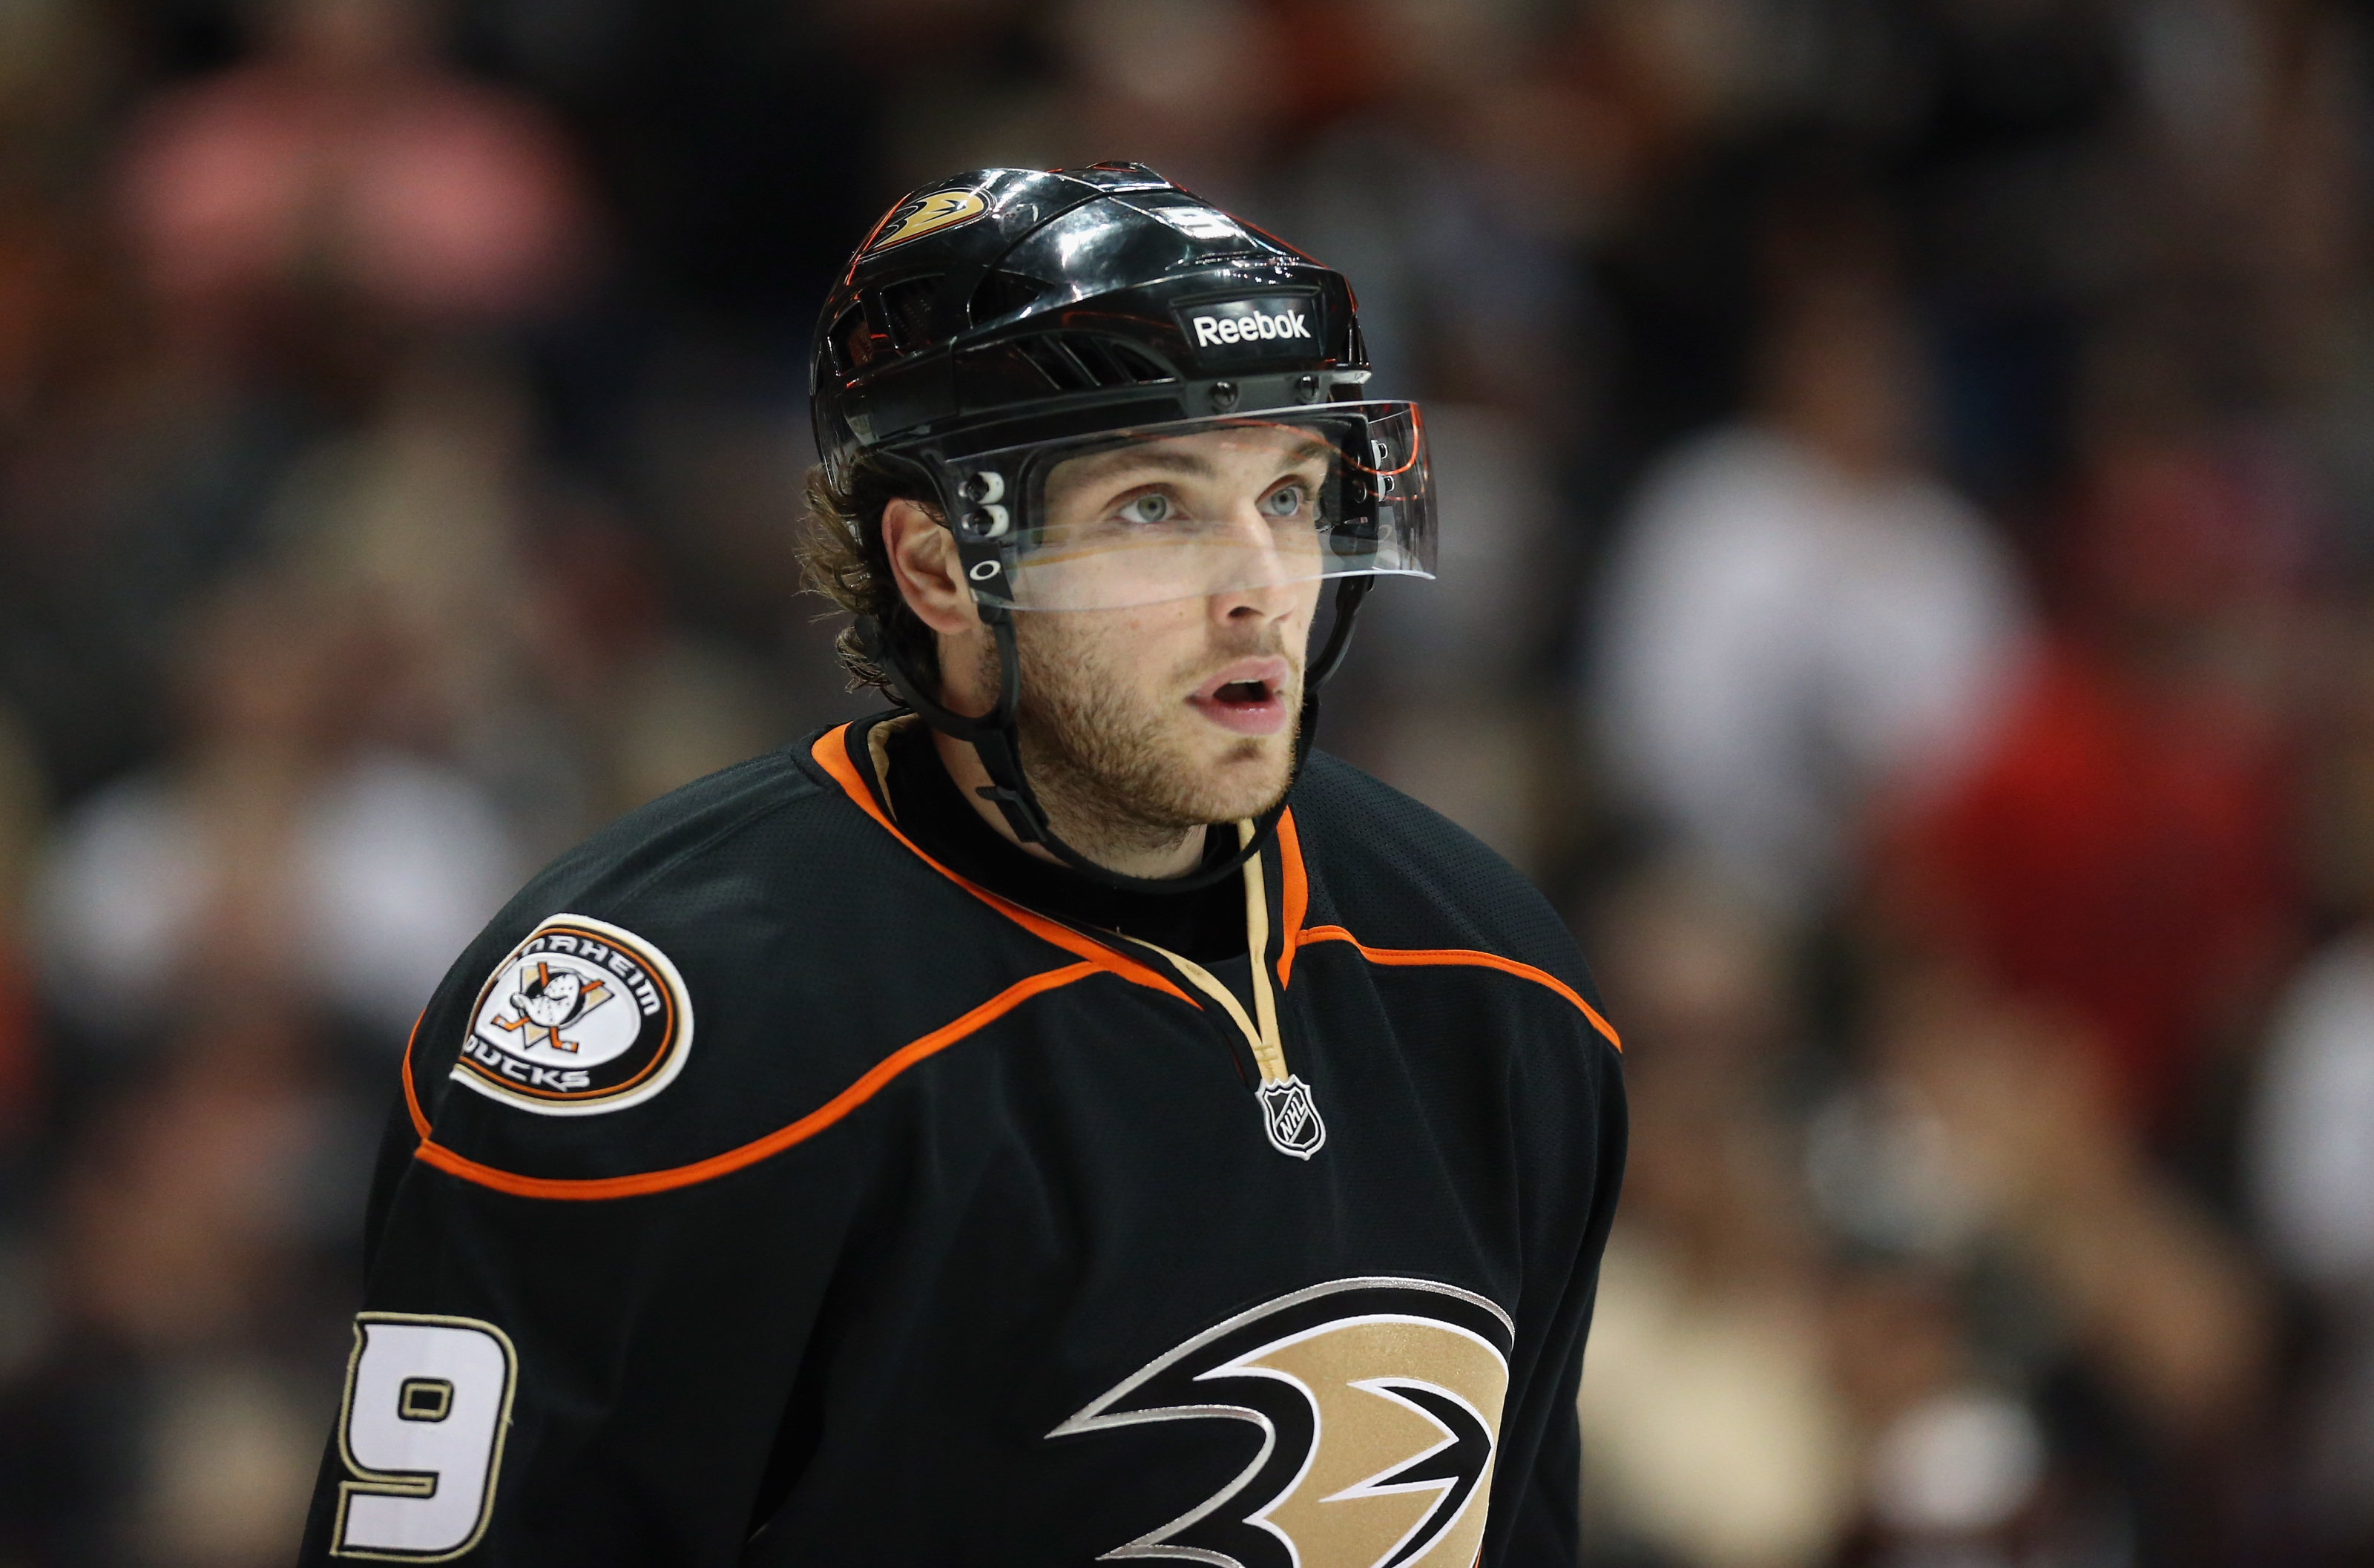 It meant everything': Bobby Ryan appreciative of Ducks' support of